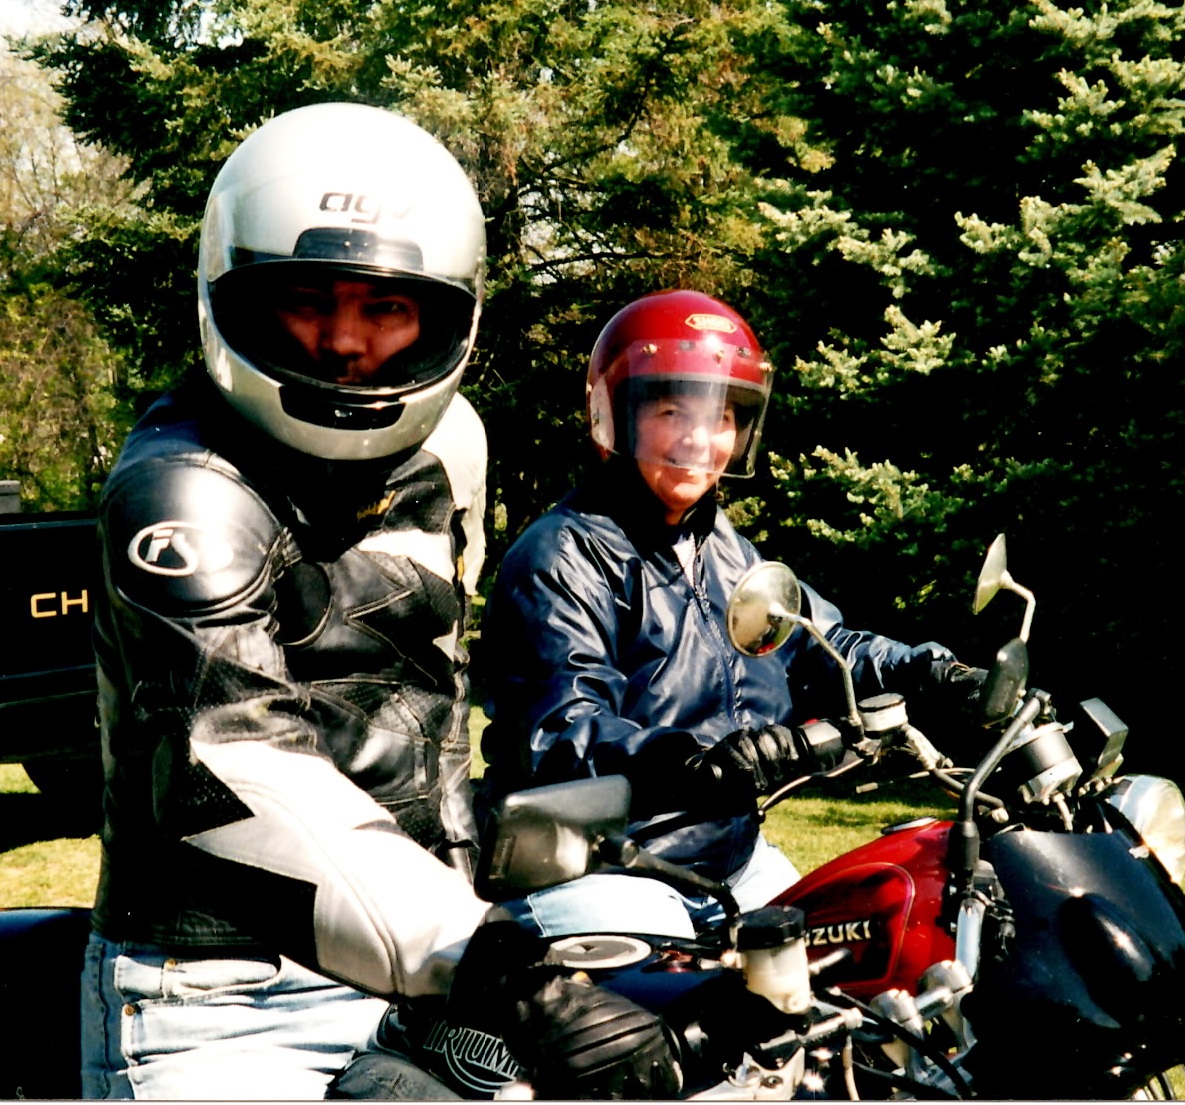 my mother and I on our motorcycles, a Triumph Speed Triple and a Suzuki GN125